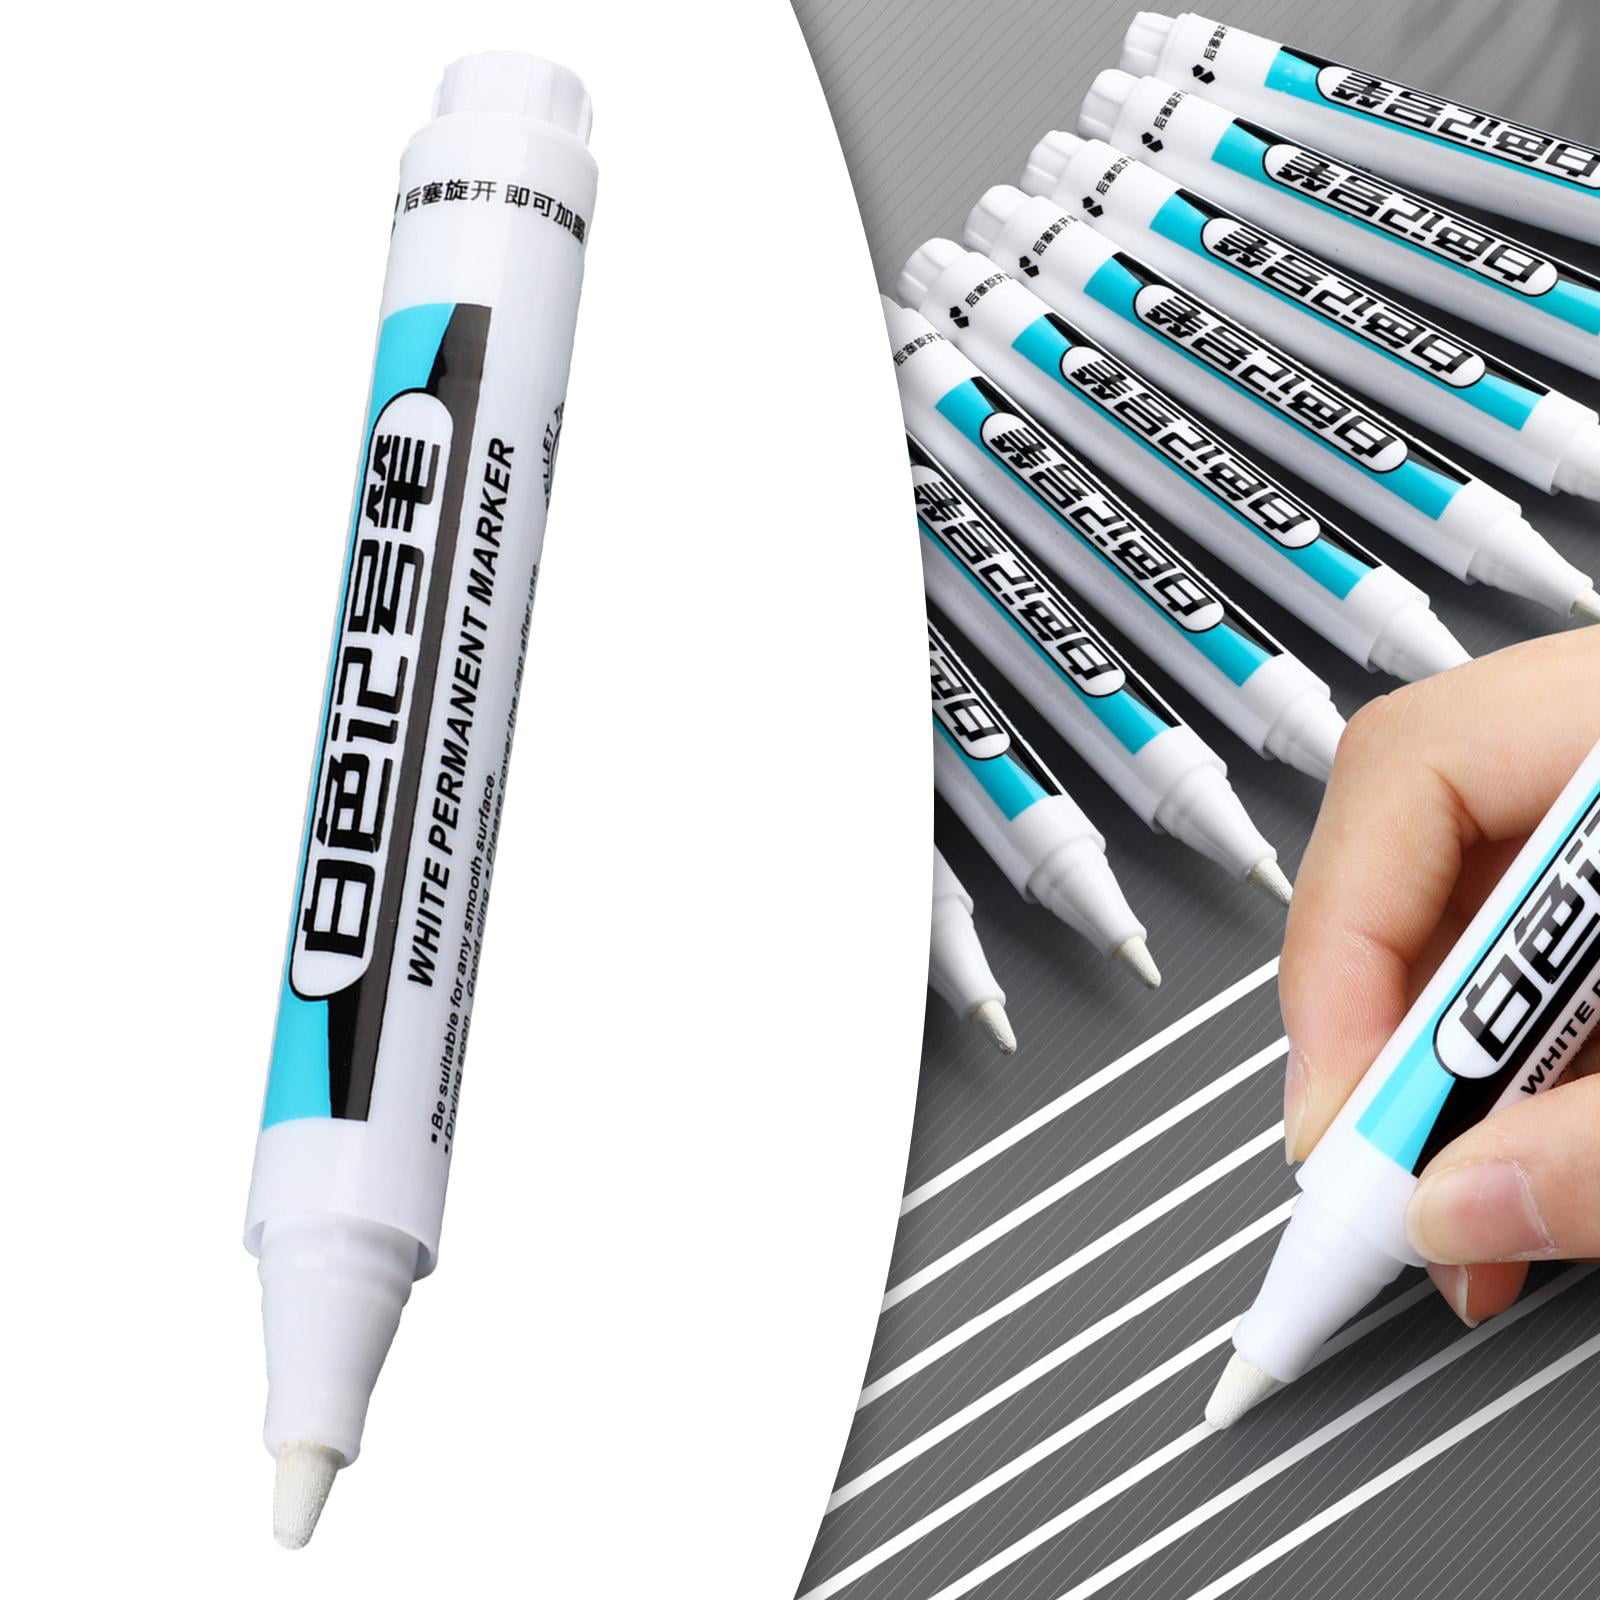 Diy Metal Permanent Paint Marker Pens 6mm White Paint Pens For Leather  Fabric Metallic Markers Pens Craftwork Oily Art Supplies - Paint Markers -  AliExpress